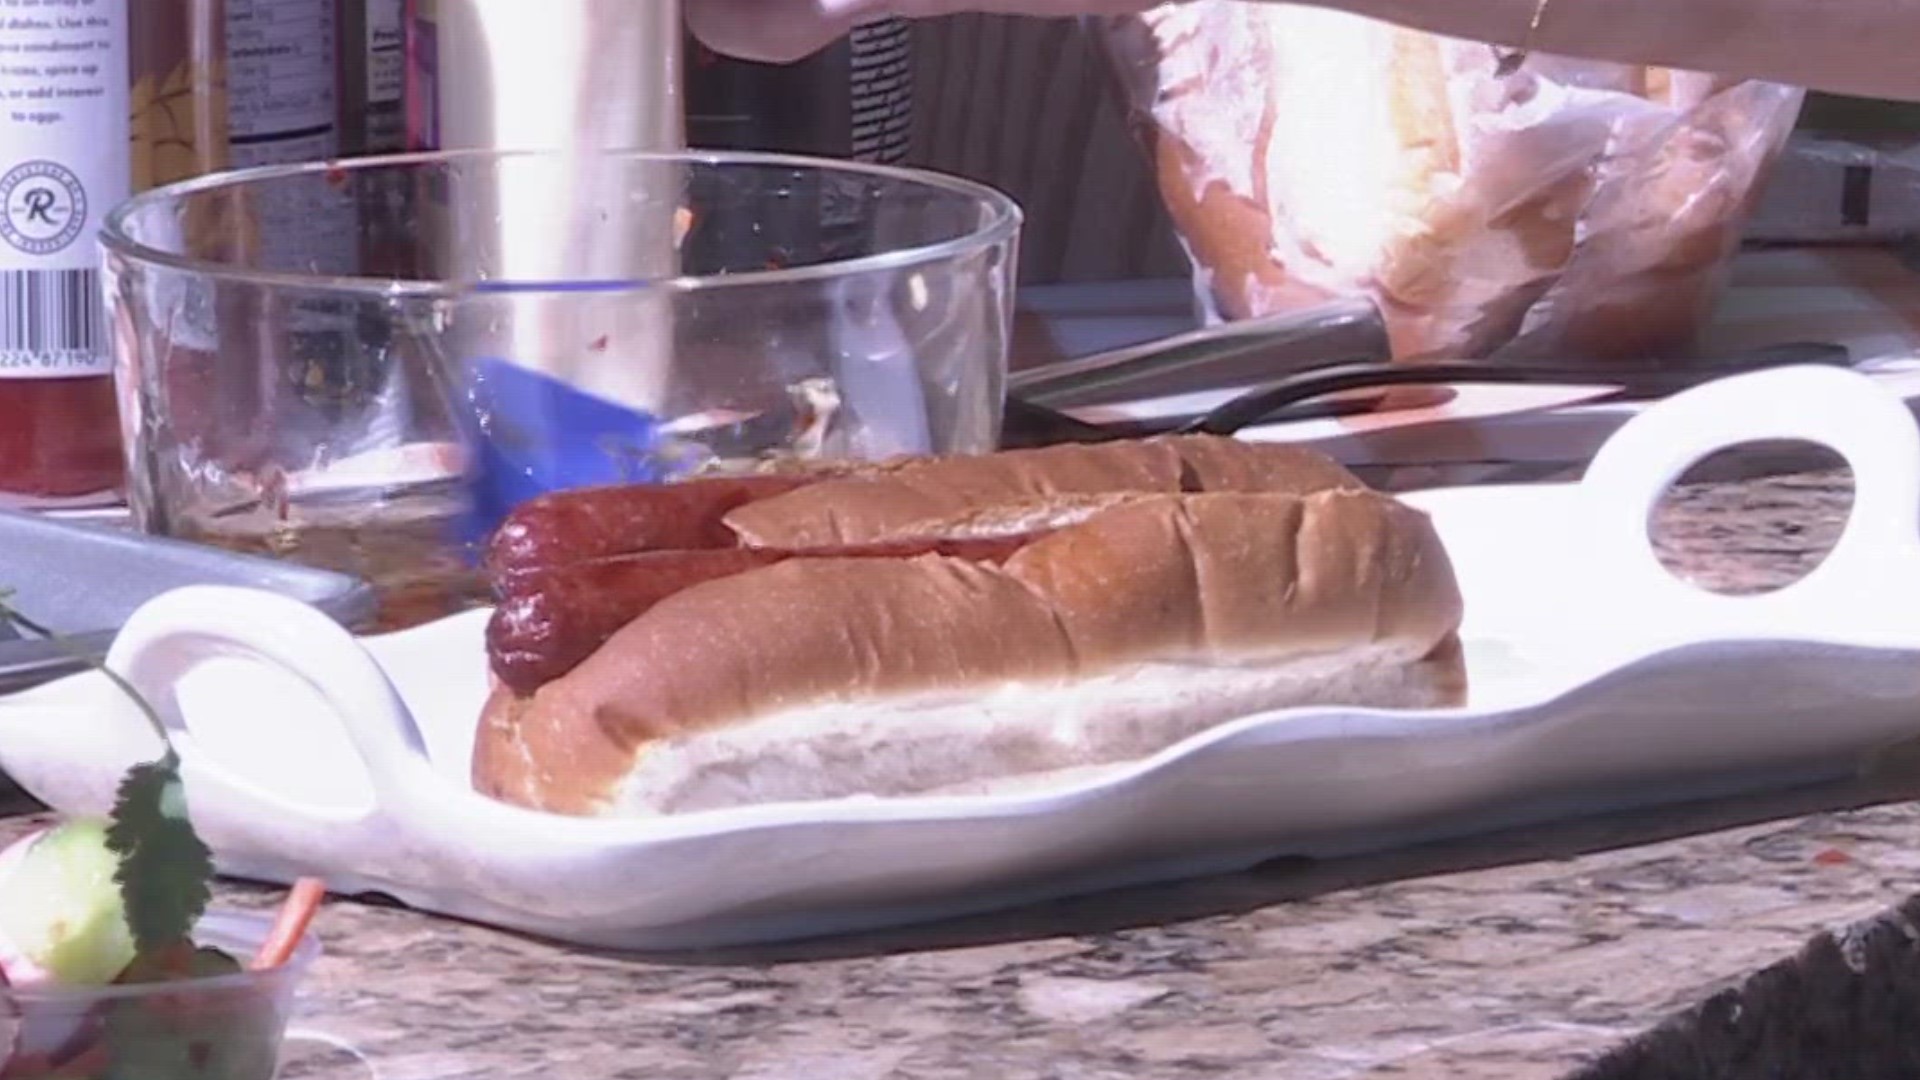 Kowalski's Culinary Director Rachael Perron joins KARE 11 Saturday in the backyard to show us how to up our hot dog game.